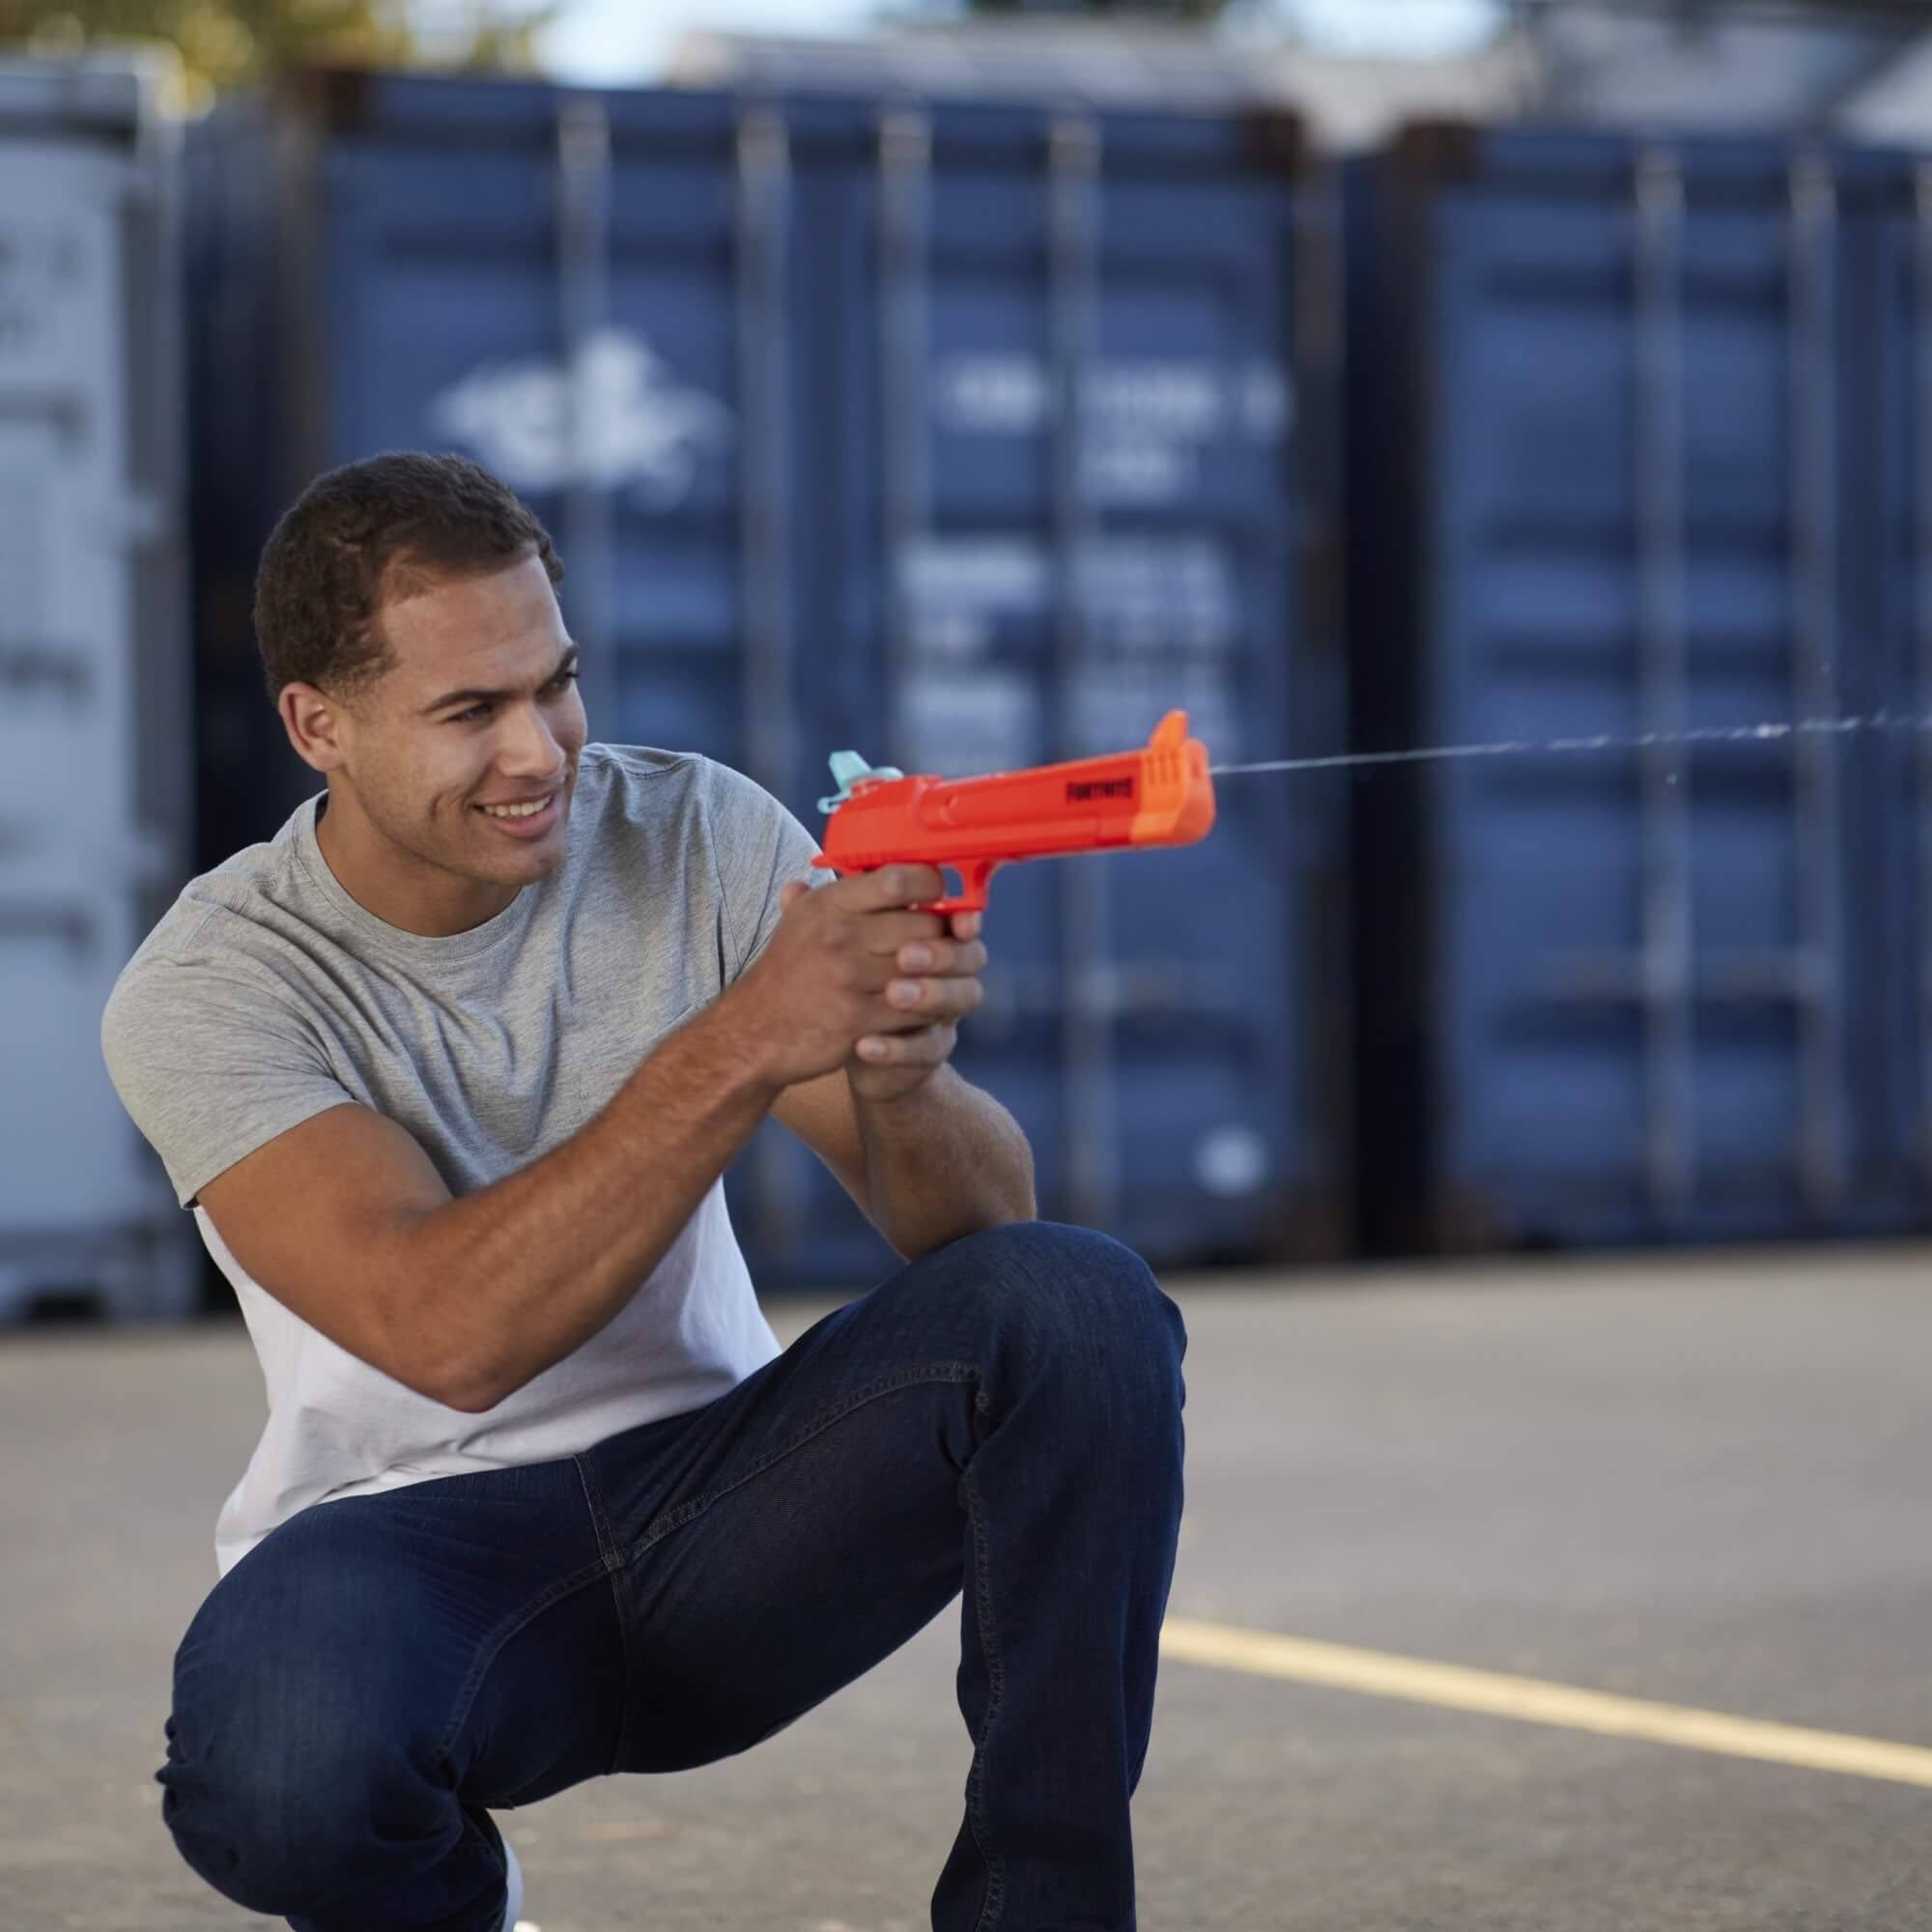 Fortnite-Inspired Nerf Water Blaster for Outdoor Fun | Image